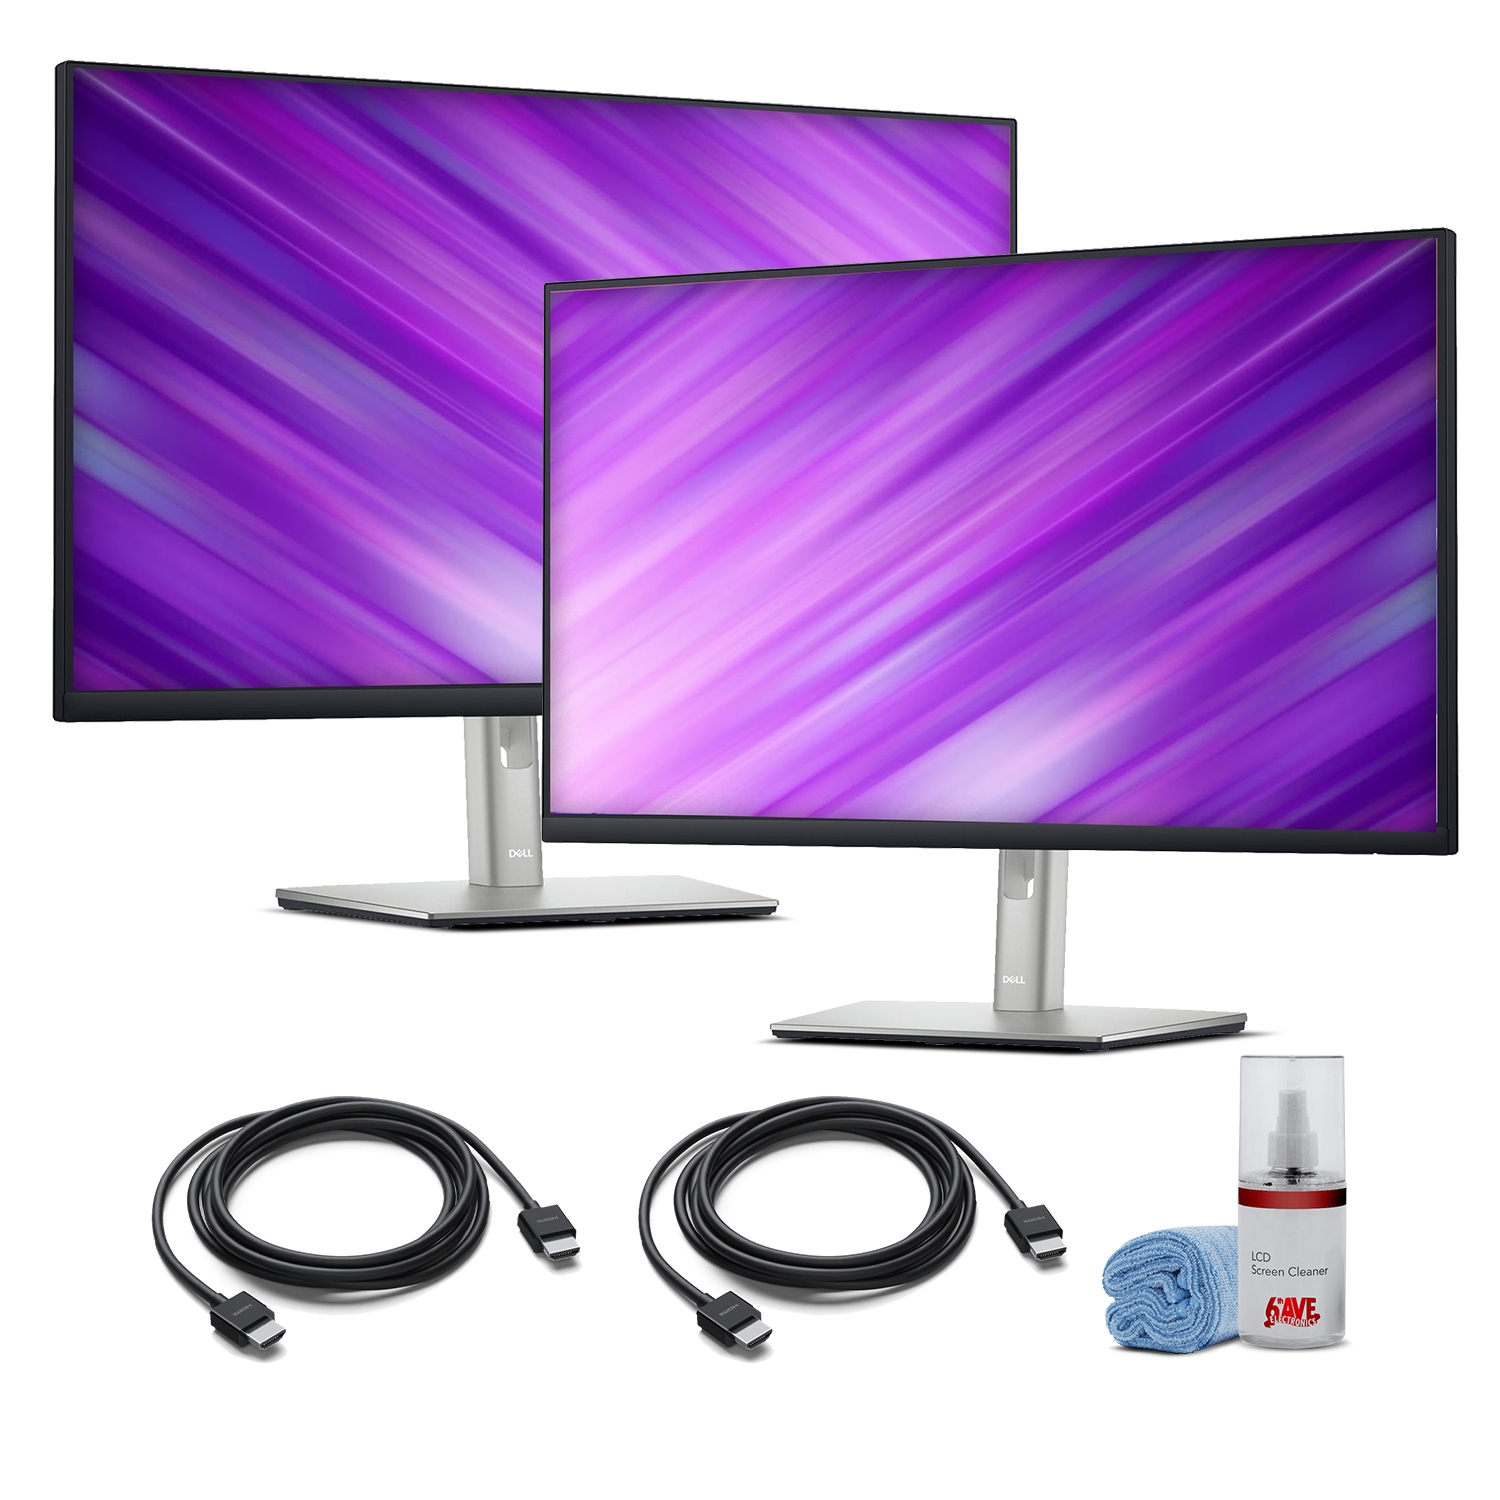 2 x Dell Full HD 1080p, 16:9 IPS Monitor + 2 x HDMI Cable + LCD Cleaning Kit